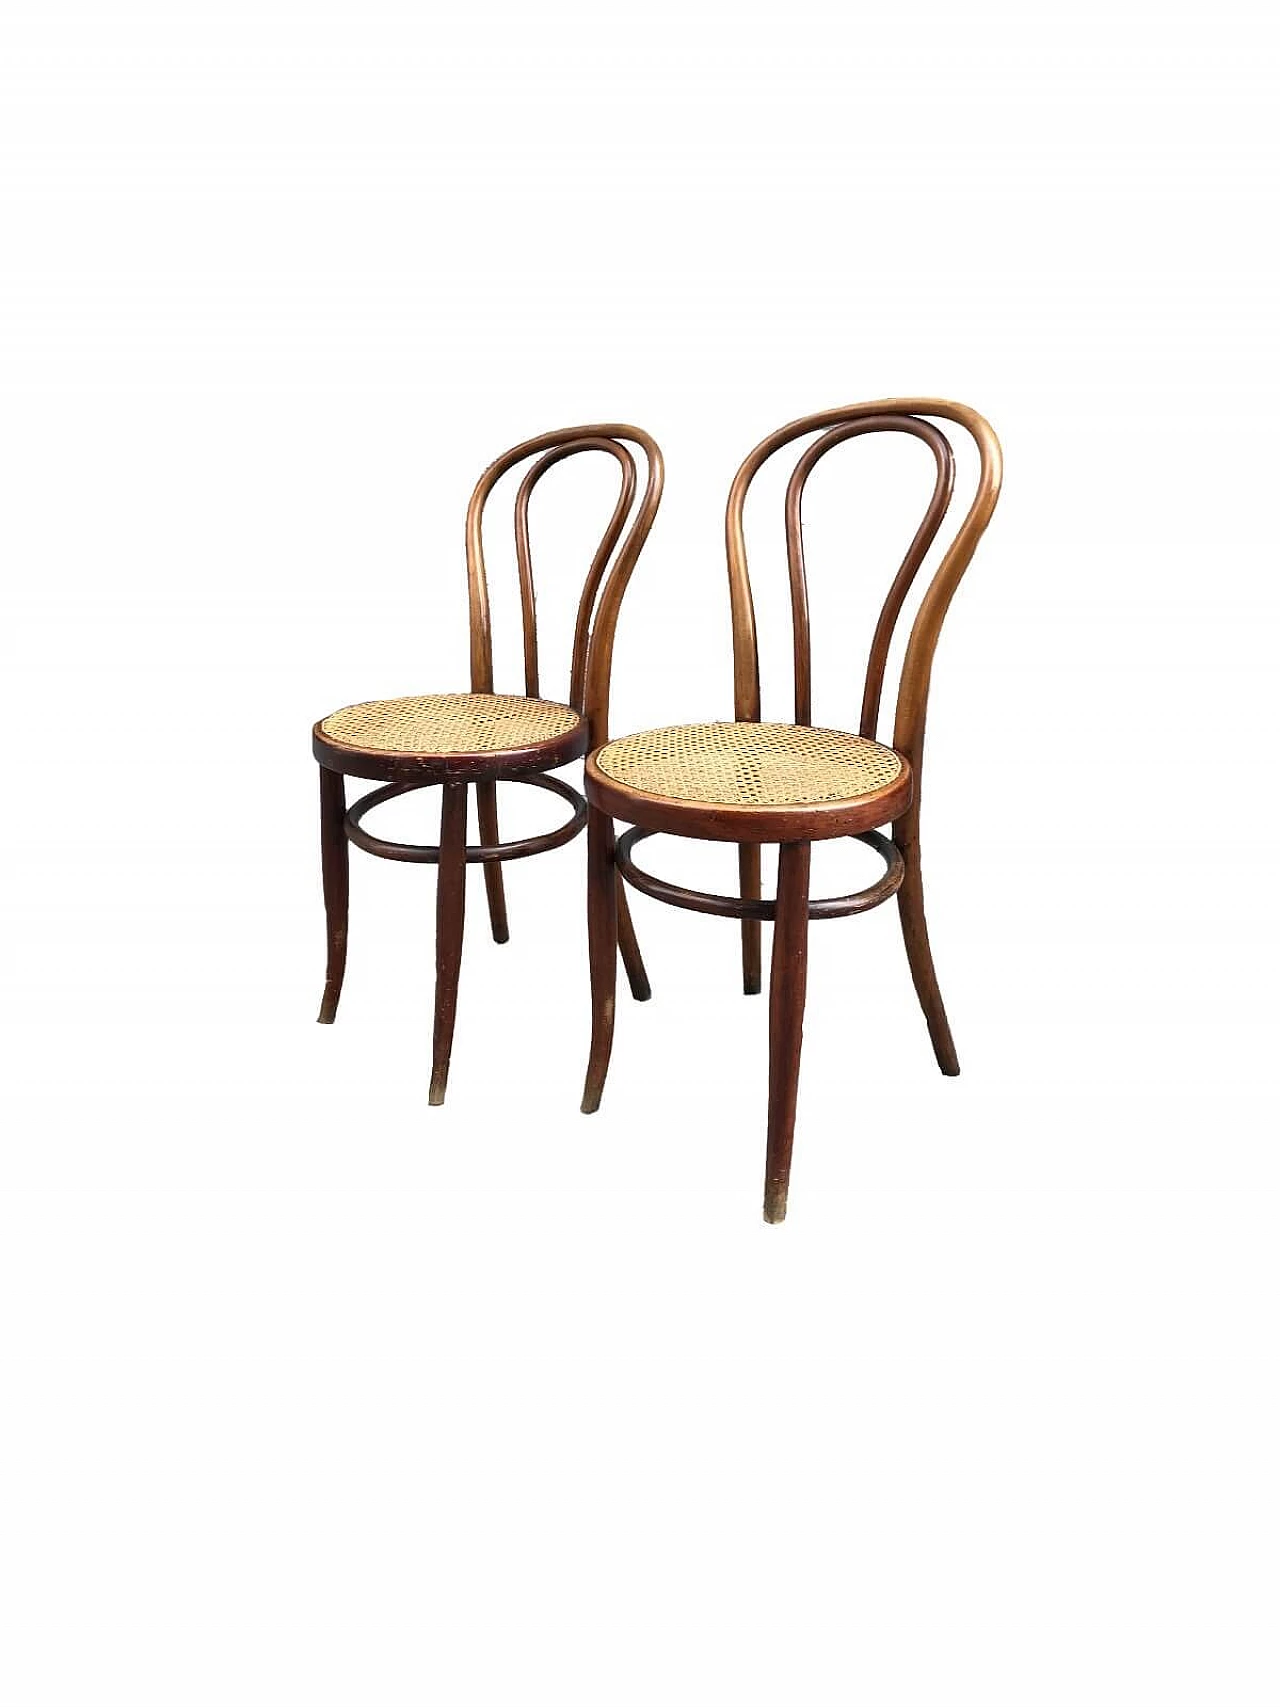 Pair of wooden chairs by Jacob & Joseph Kohn, late 19th century 1